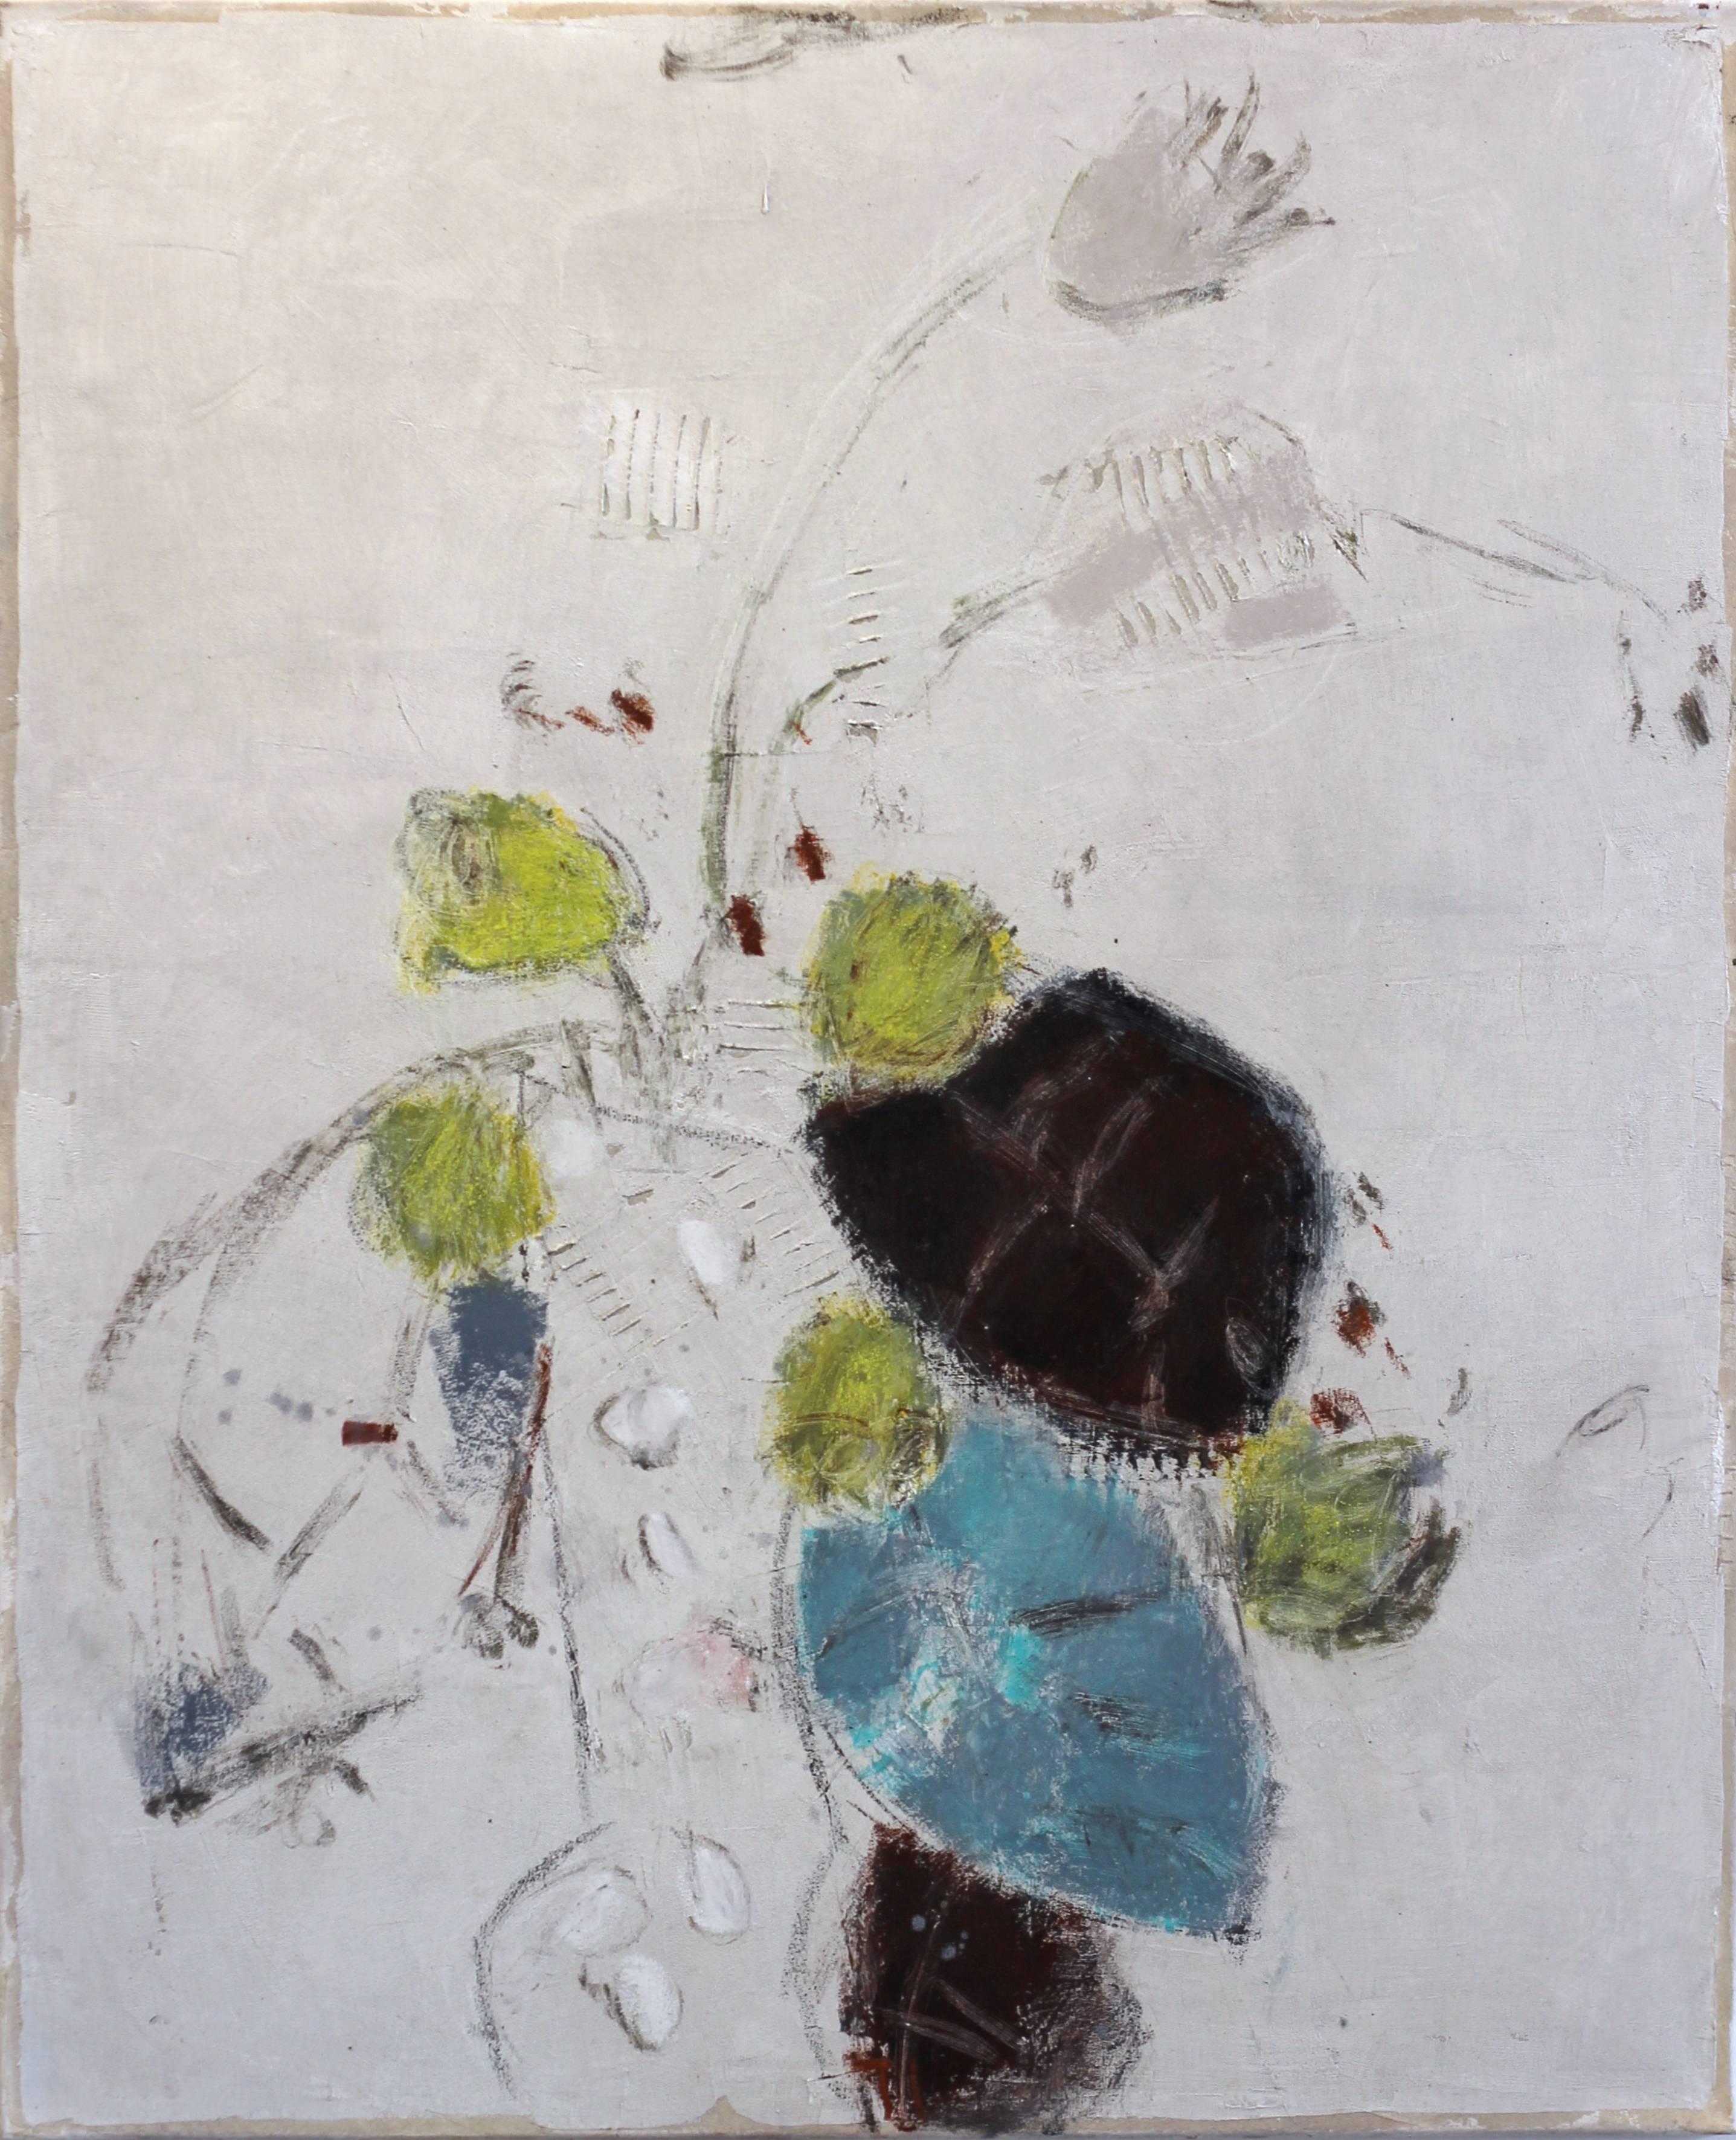 Abstract Painting Bernhard Zimmer - AWH 161 - Nature morte abstraite figurative originale à l'huile